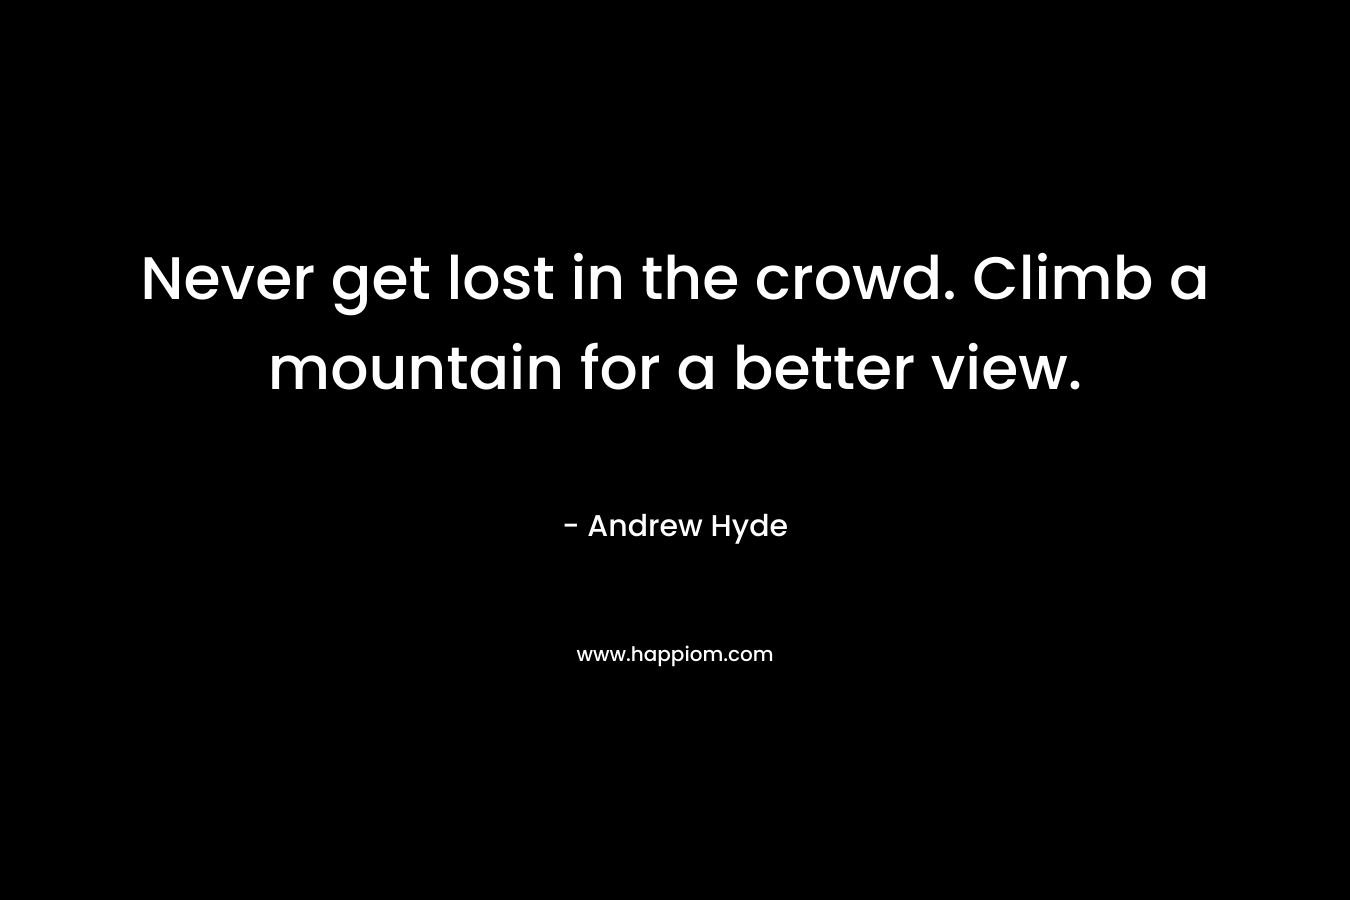 Never get lost in the crowd. Climb a mountain for a better view.